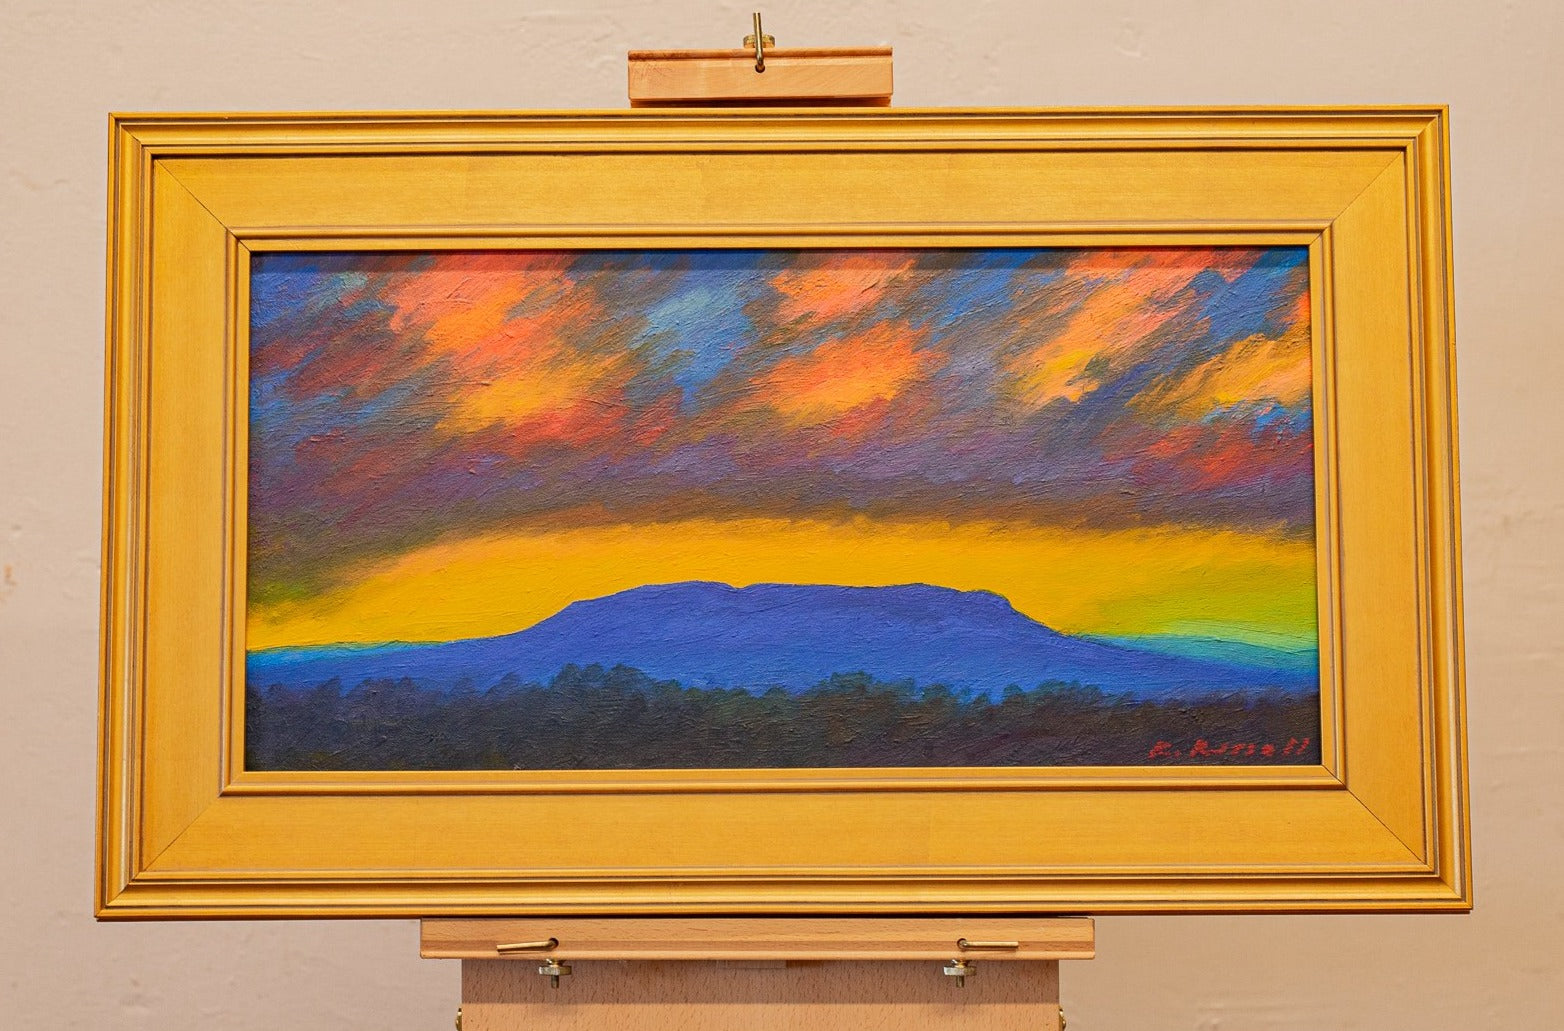 Blue Mountain by Ryan Russell. In a gold frame, resting on an artist's easel. Featuring a blue-toned House Mountain under a colorful evening sky.